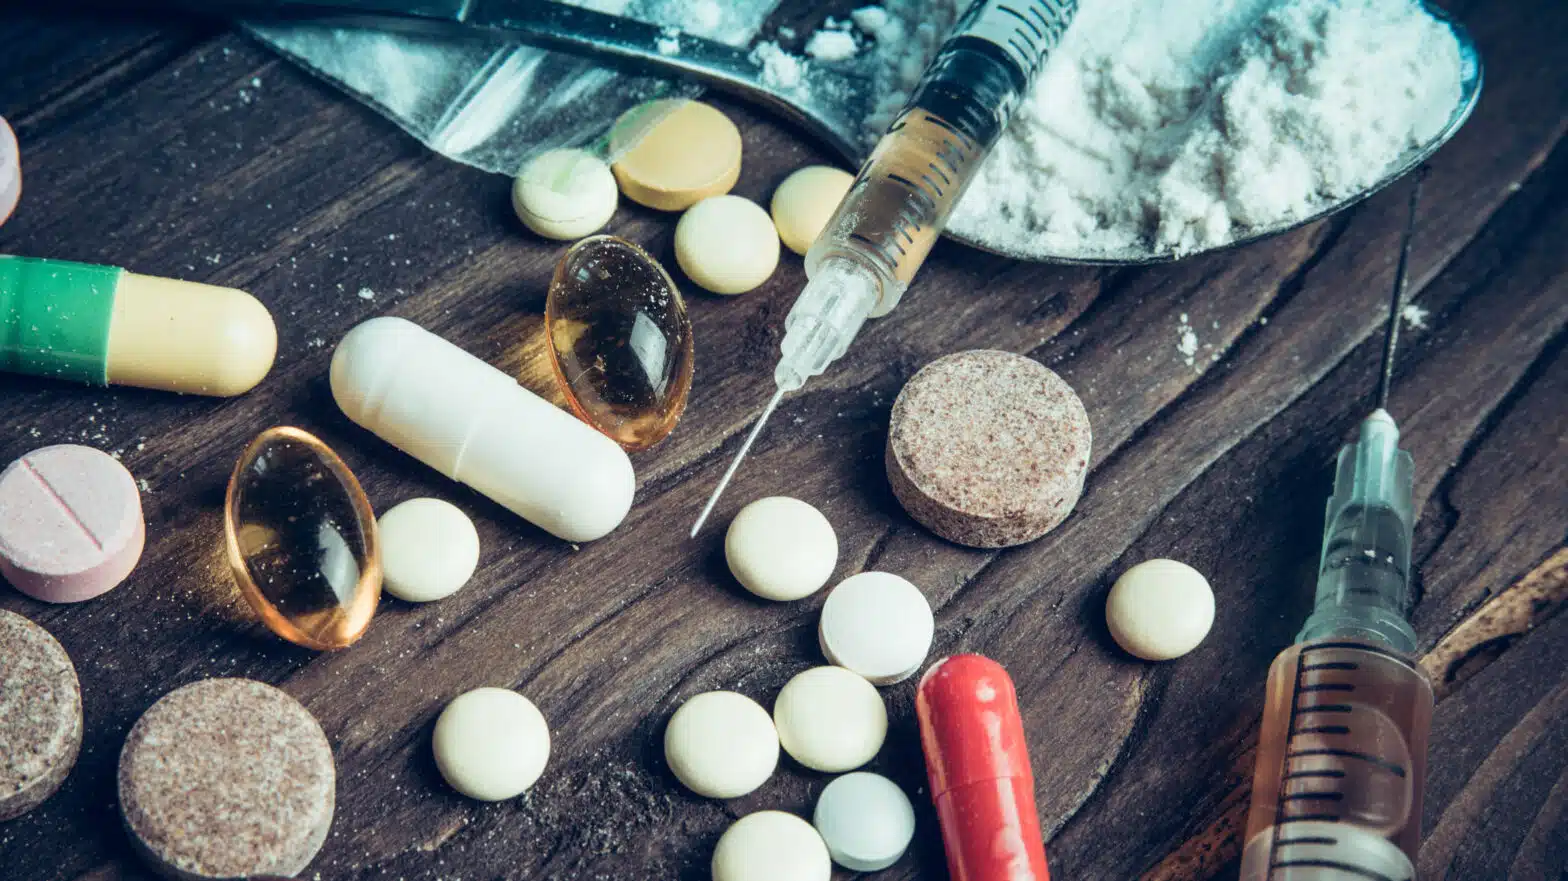 Pills, tablets, syringes, and powder on a wooden table - Top 5 Most Addictive Substances In Massachusetts